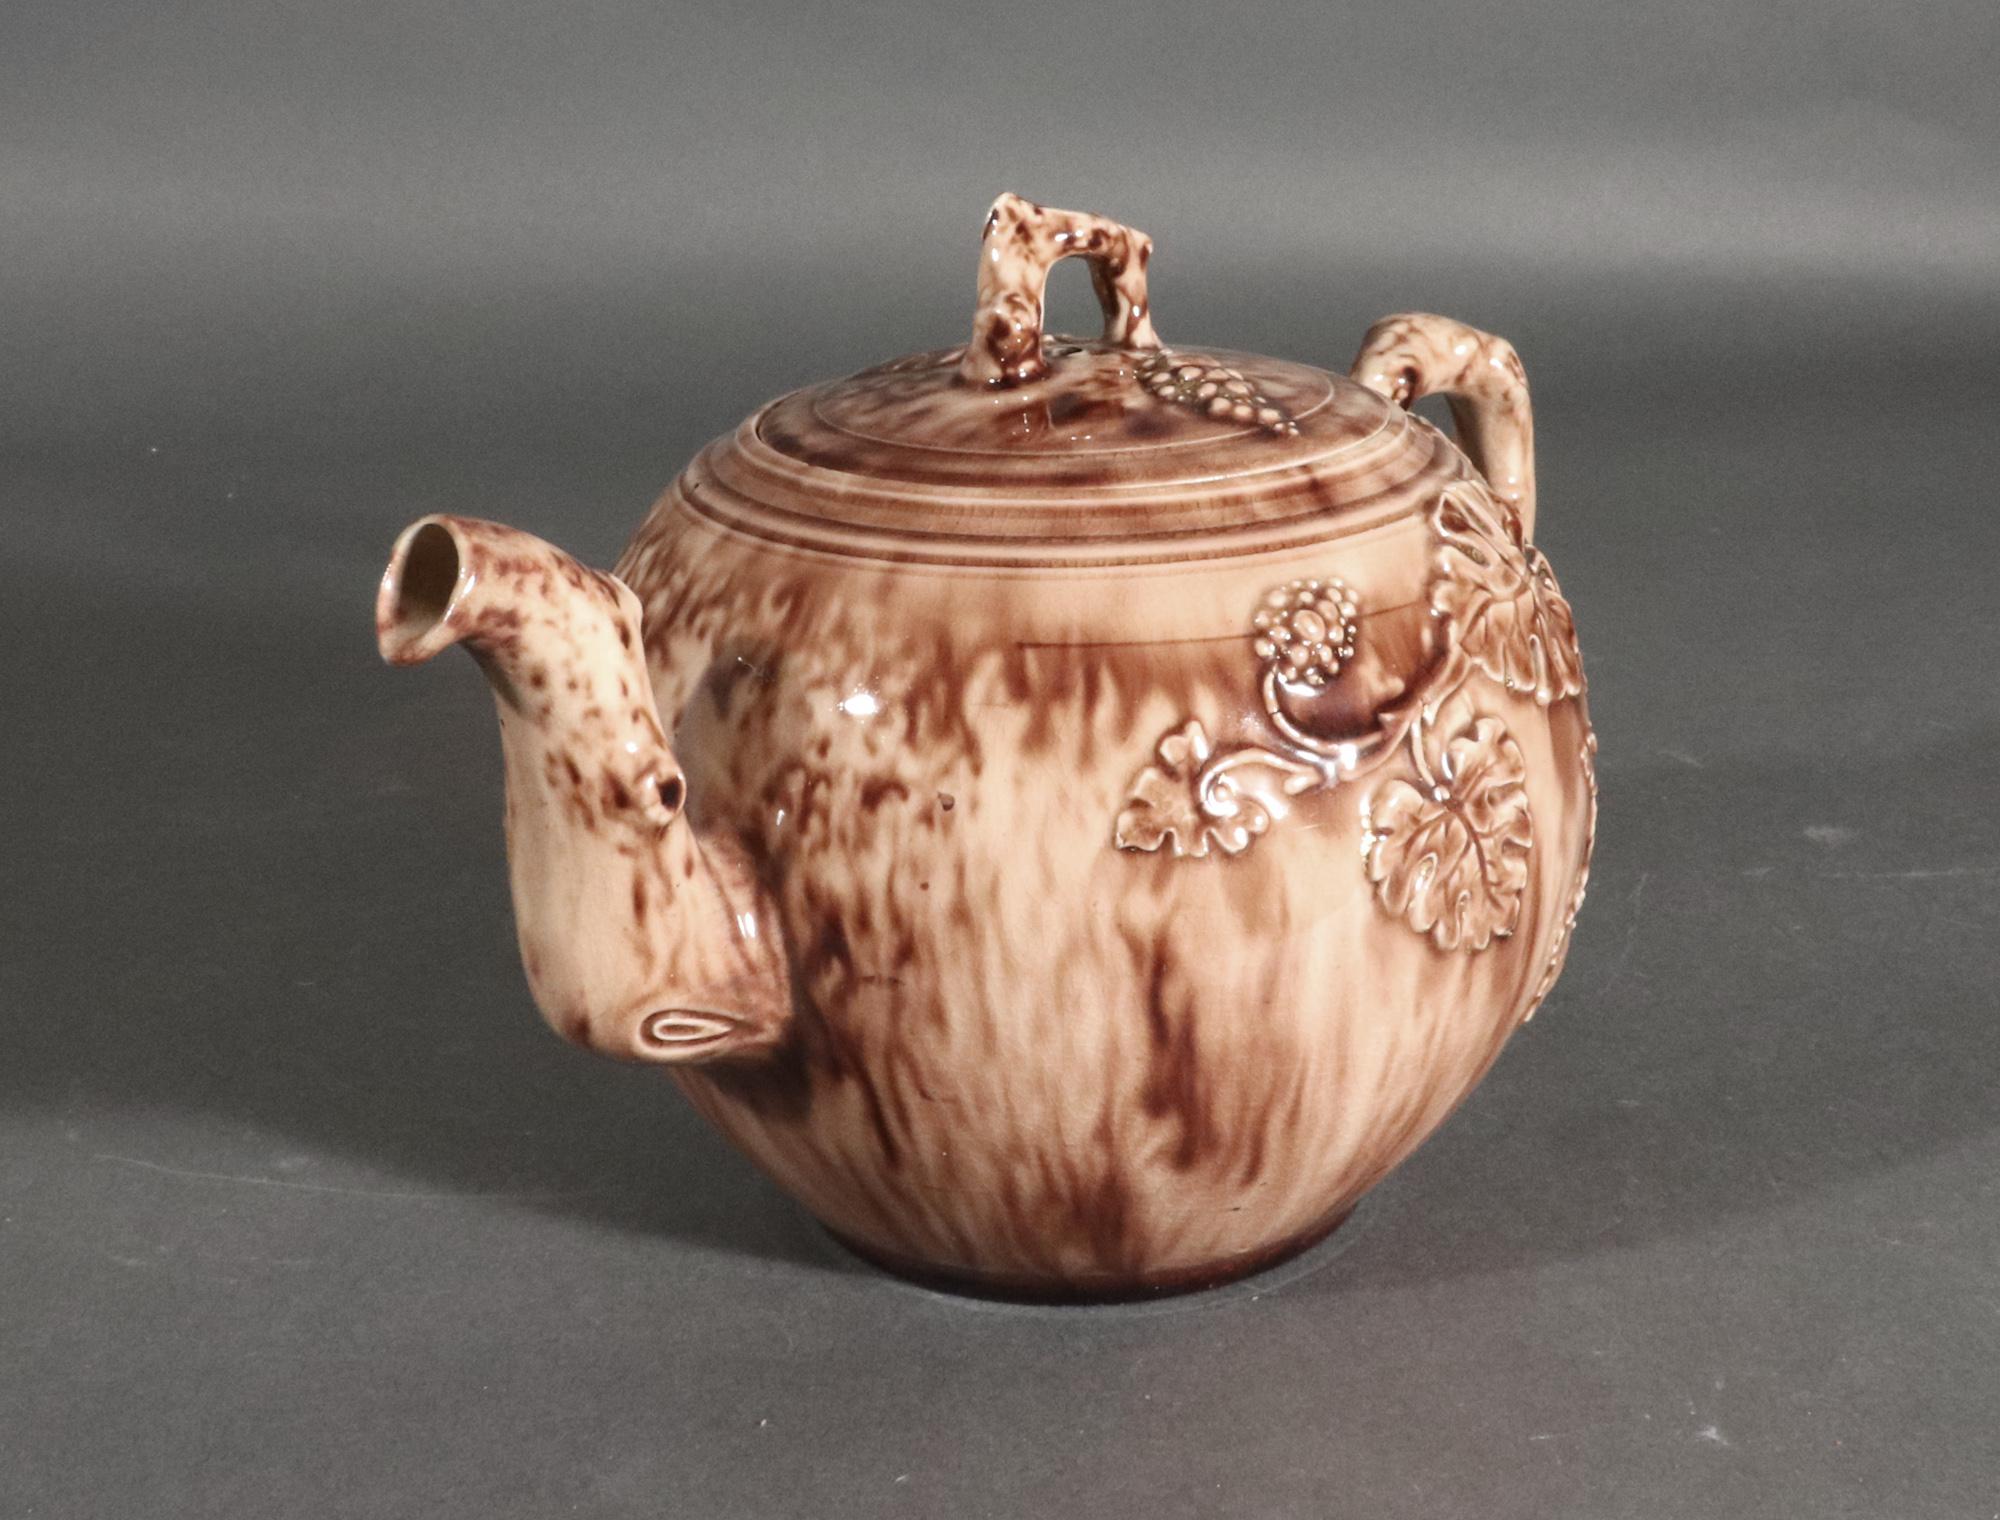 18th Century Whieldon-type Large Tortoise-shell Teapot and Cover In Good Condition For Sale In Downingtown, PA